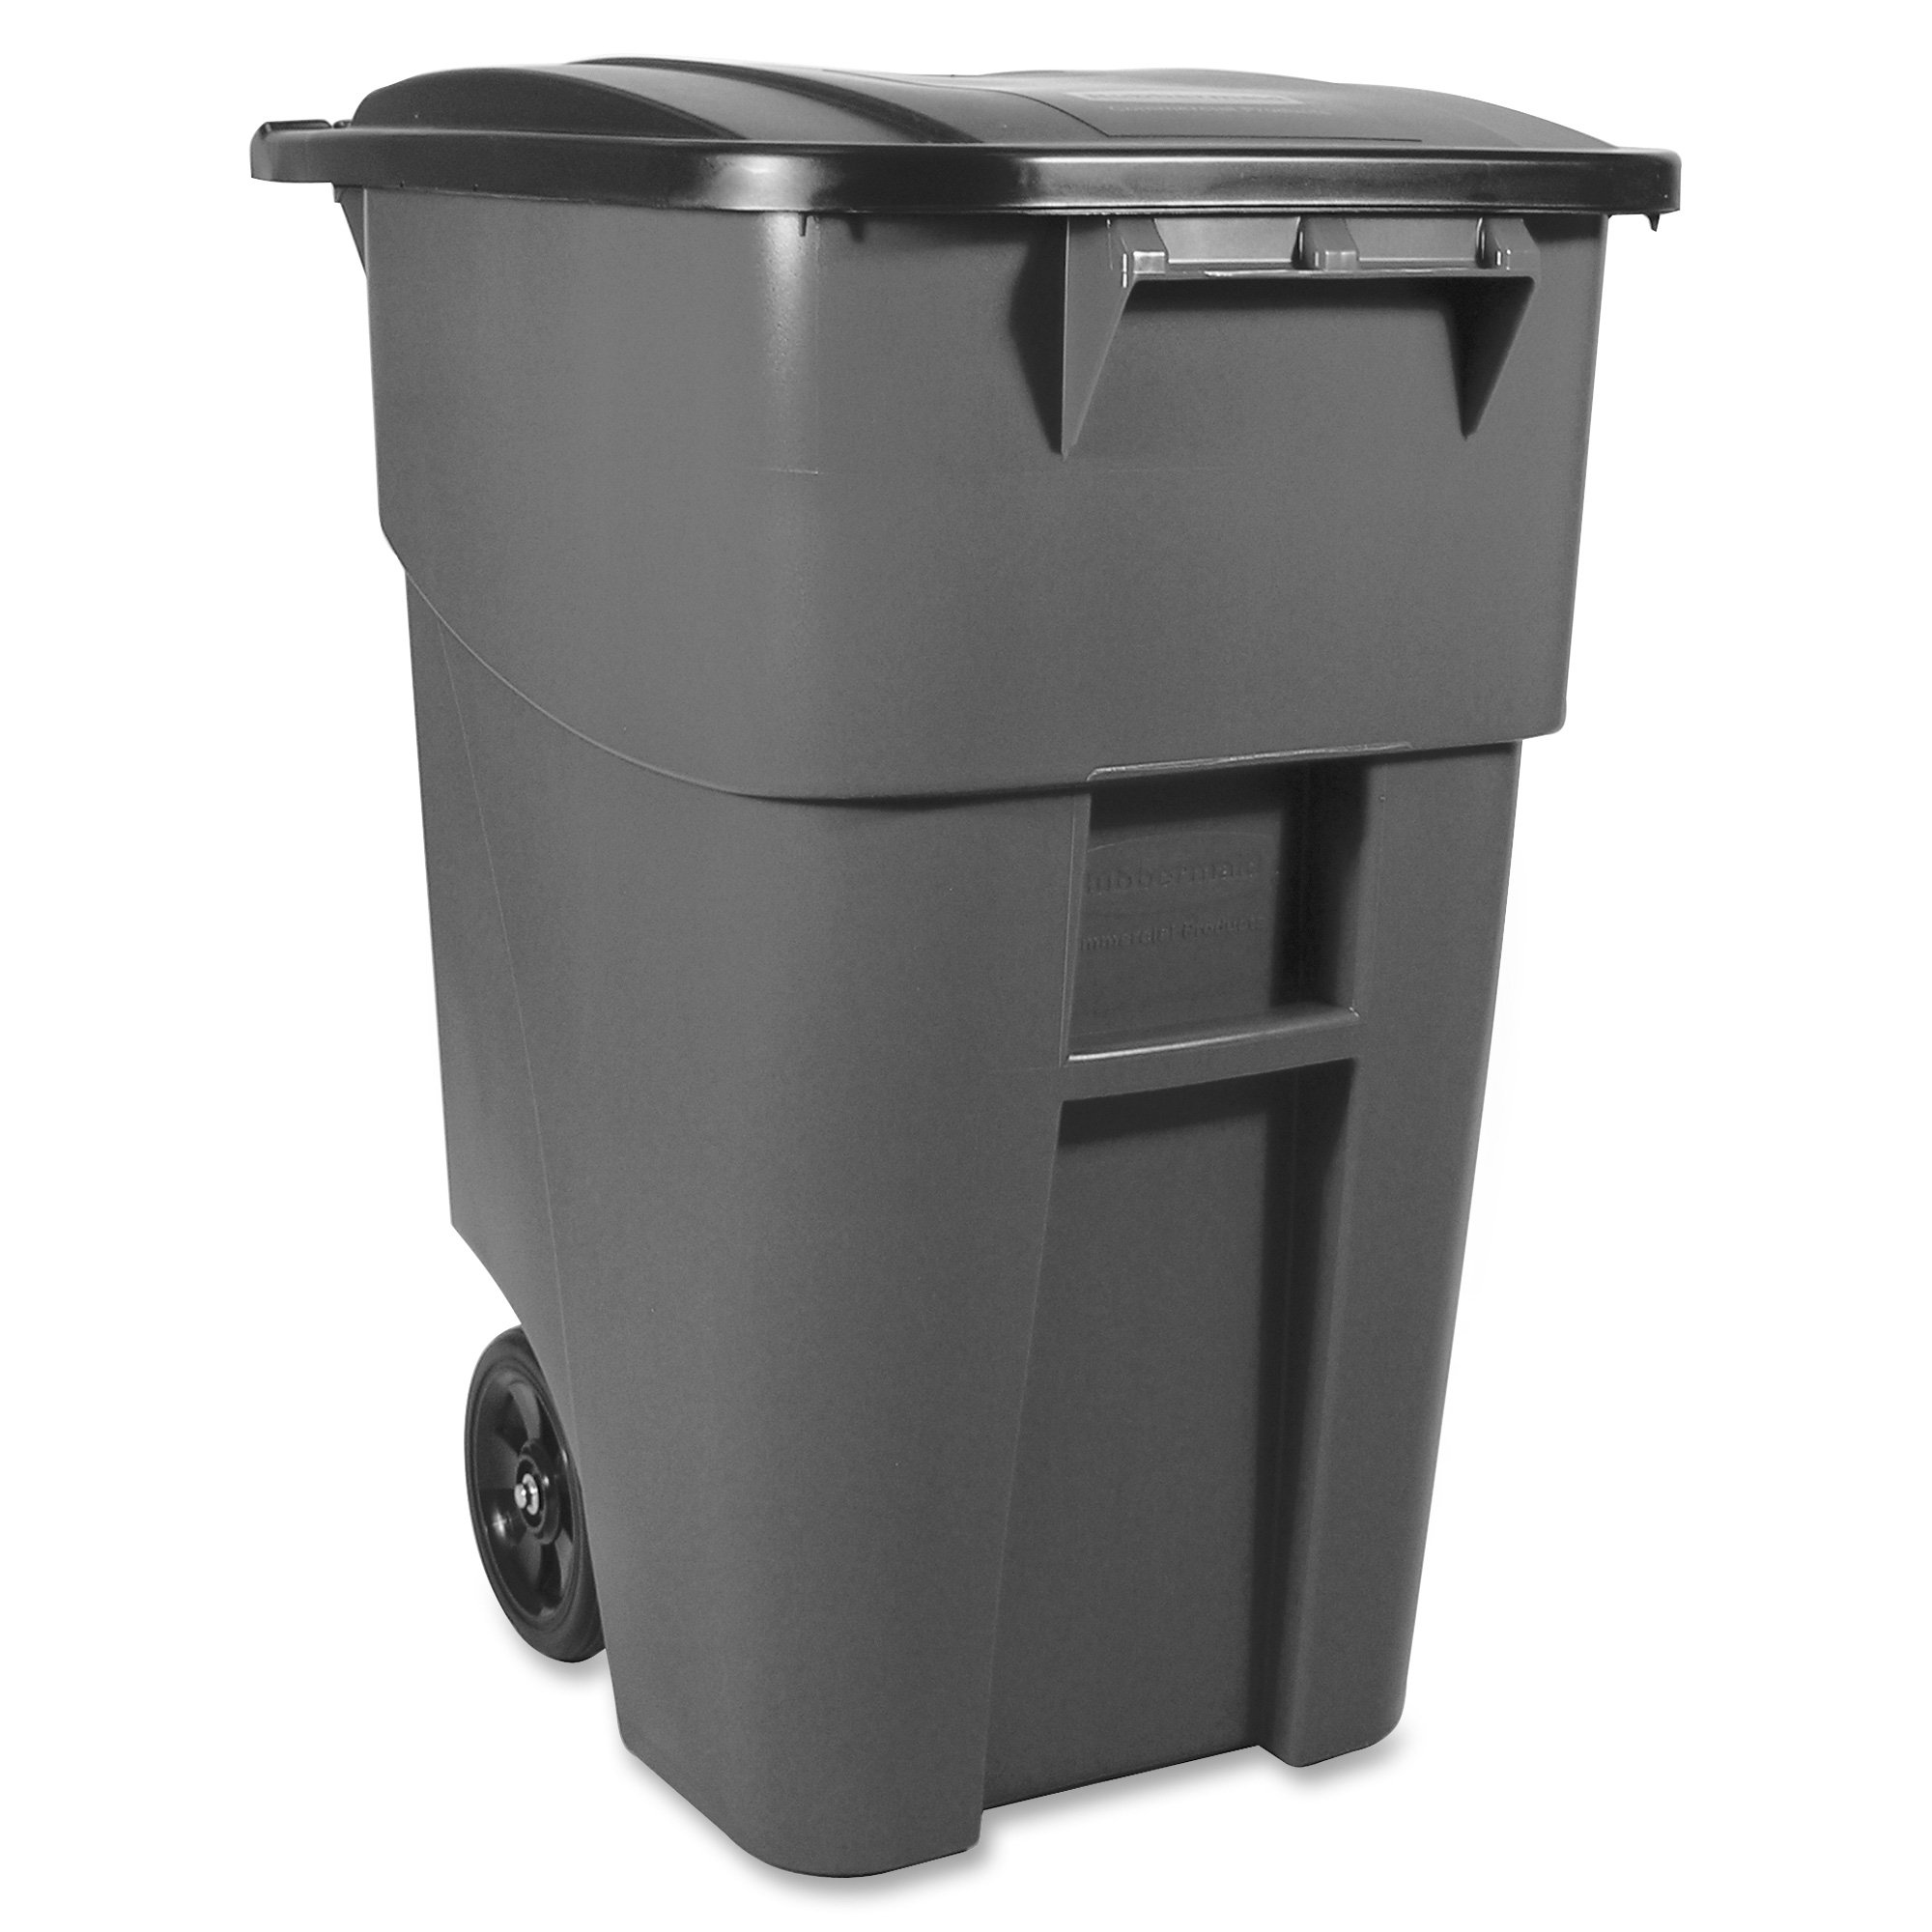 Rubbermaid 50 Gallon Commercial Garbage Brute Rollout Container with Lid, Gray - Each